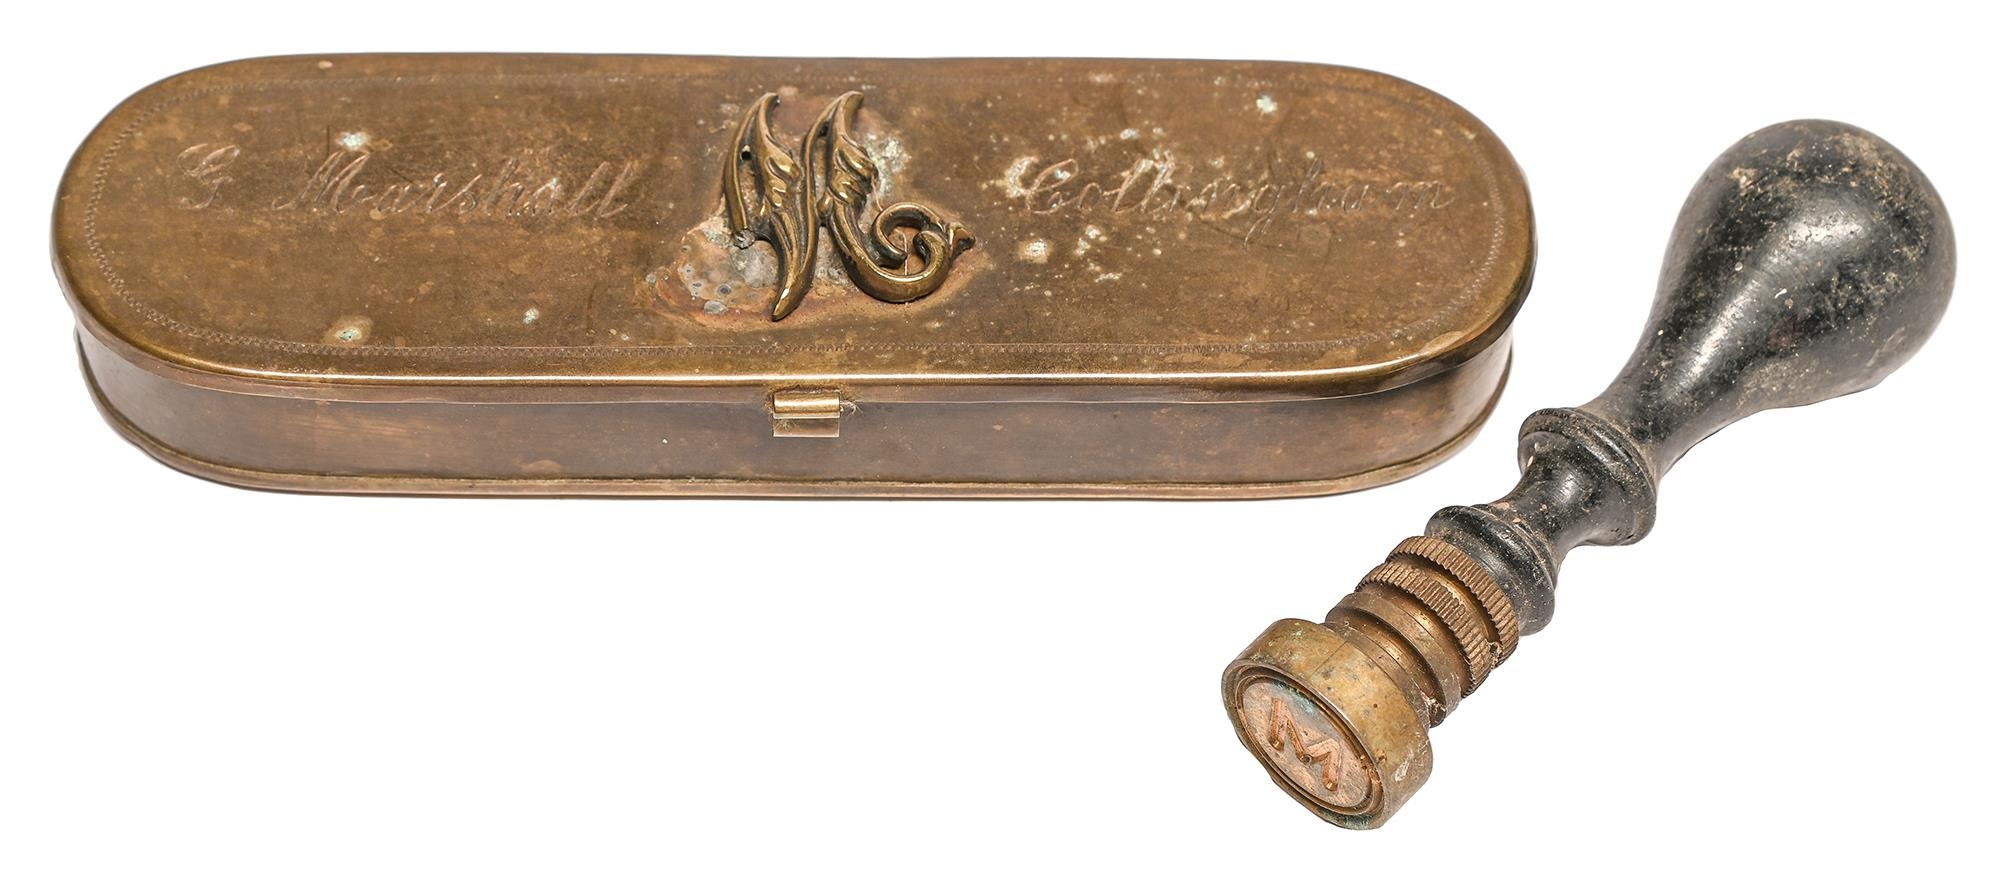 A Victorian sheet brass tobacco box, the lid applied with the initial letter M and engraved G